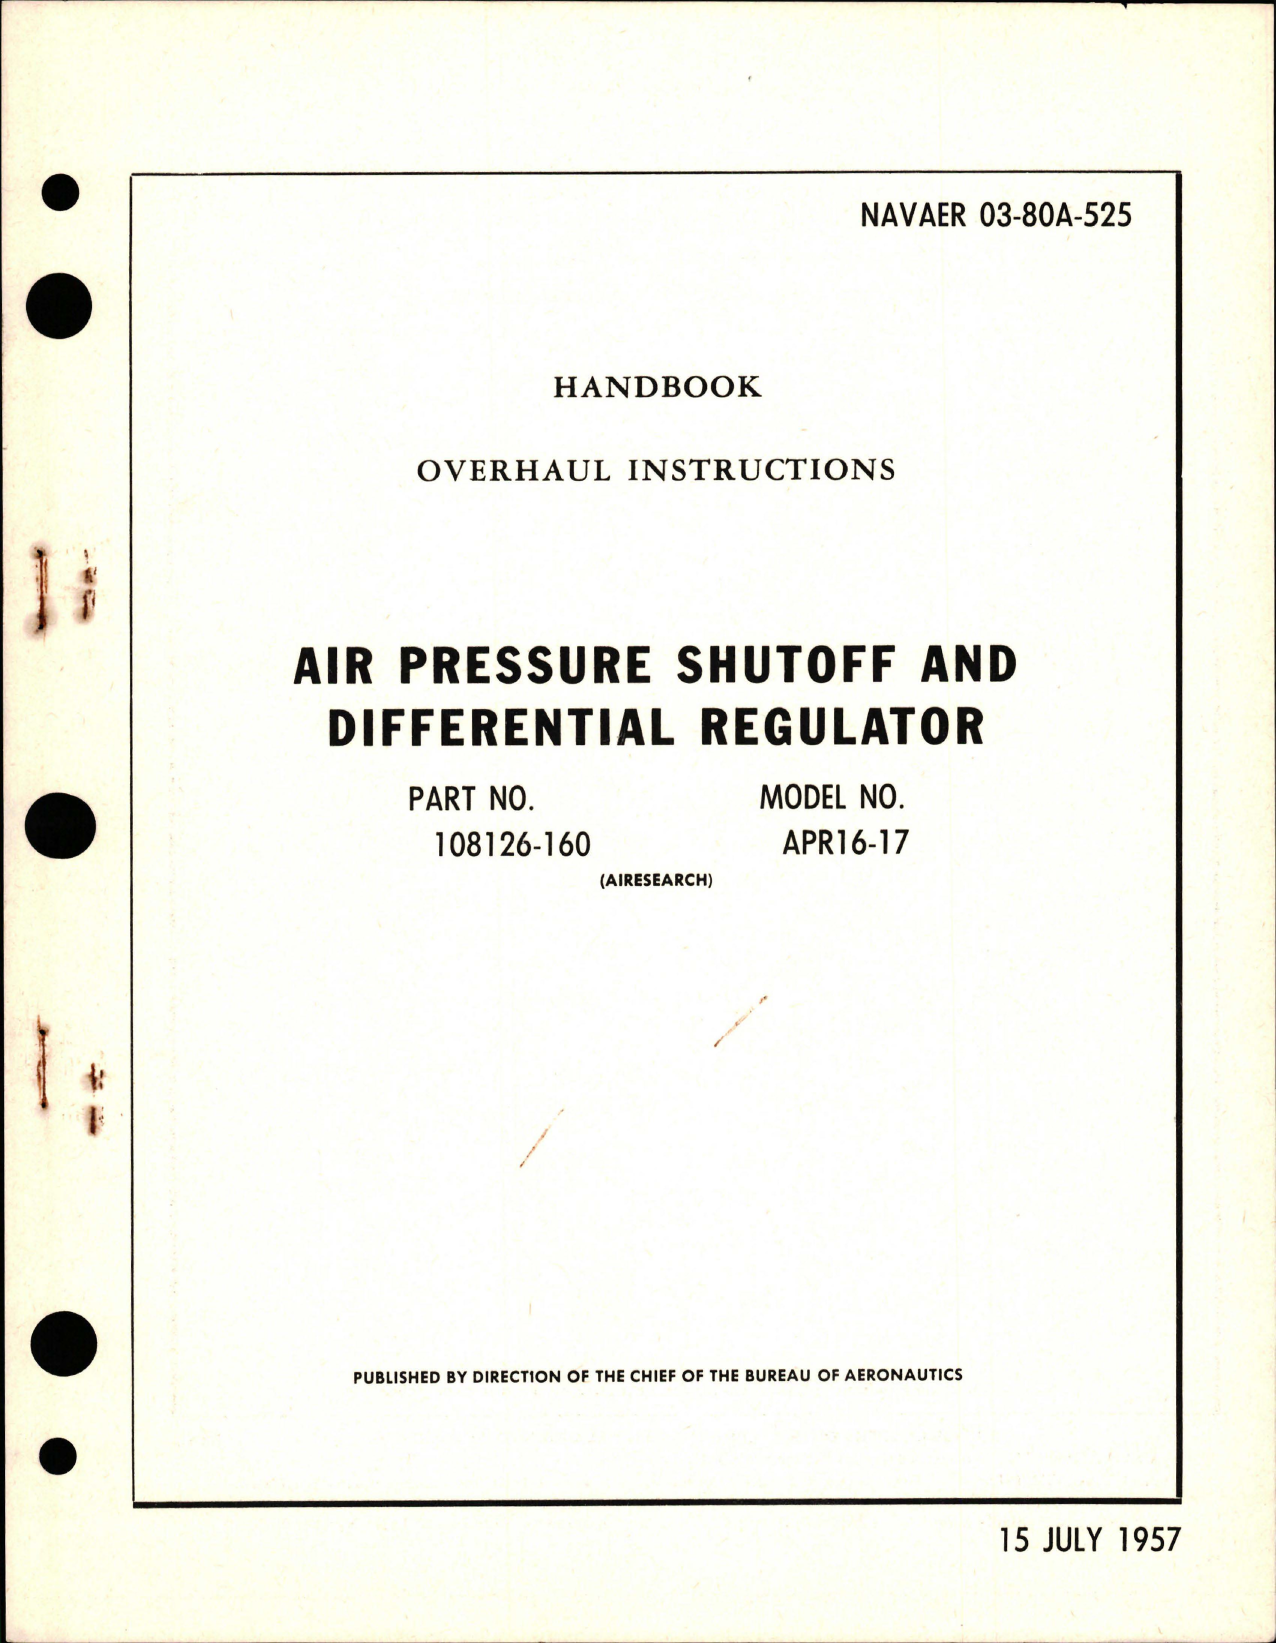 Sample page 1 from AirCorps Library document: Overhaul Instructions for Air Pressure Shutoff and Differential Regulator - Part 108126-160 - Model APR16-17